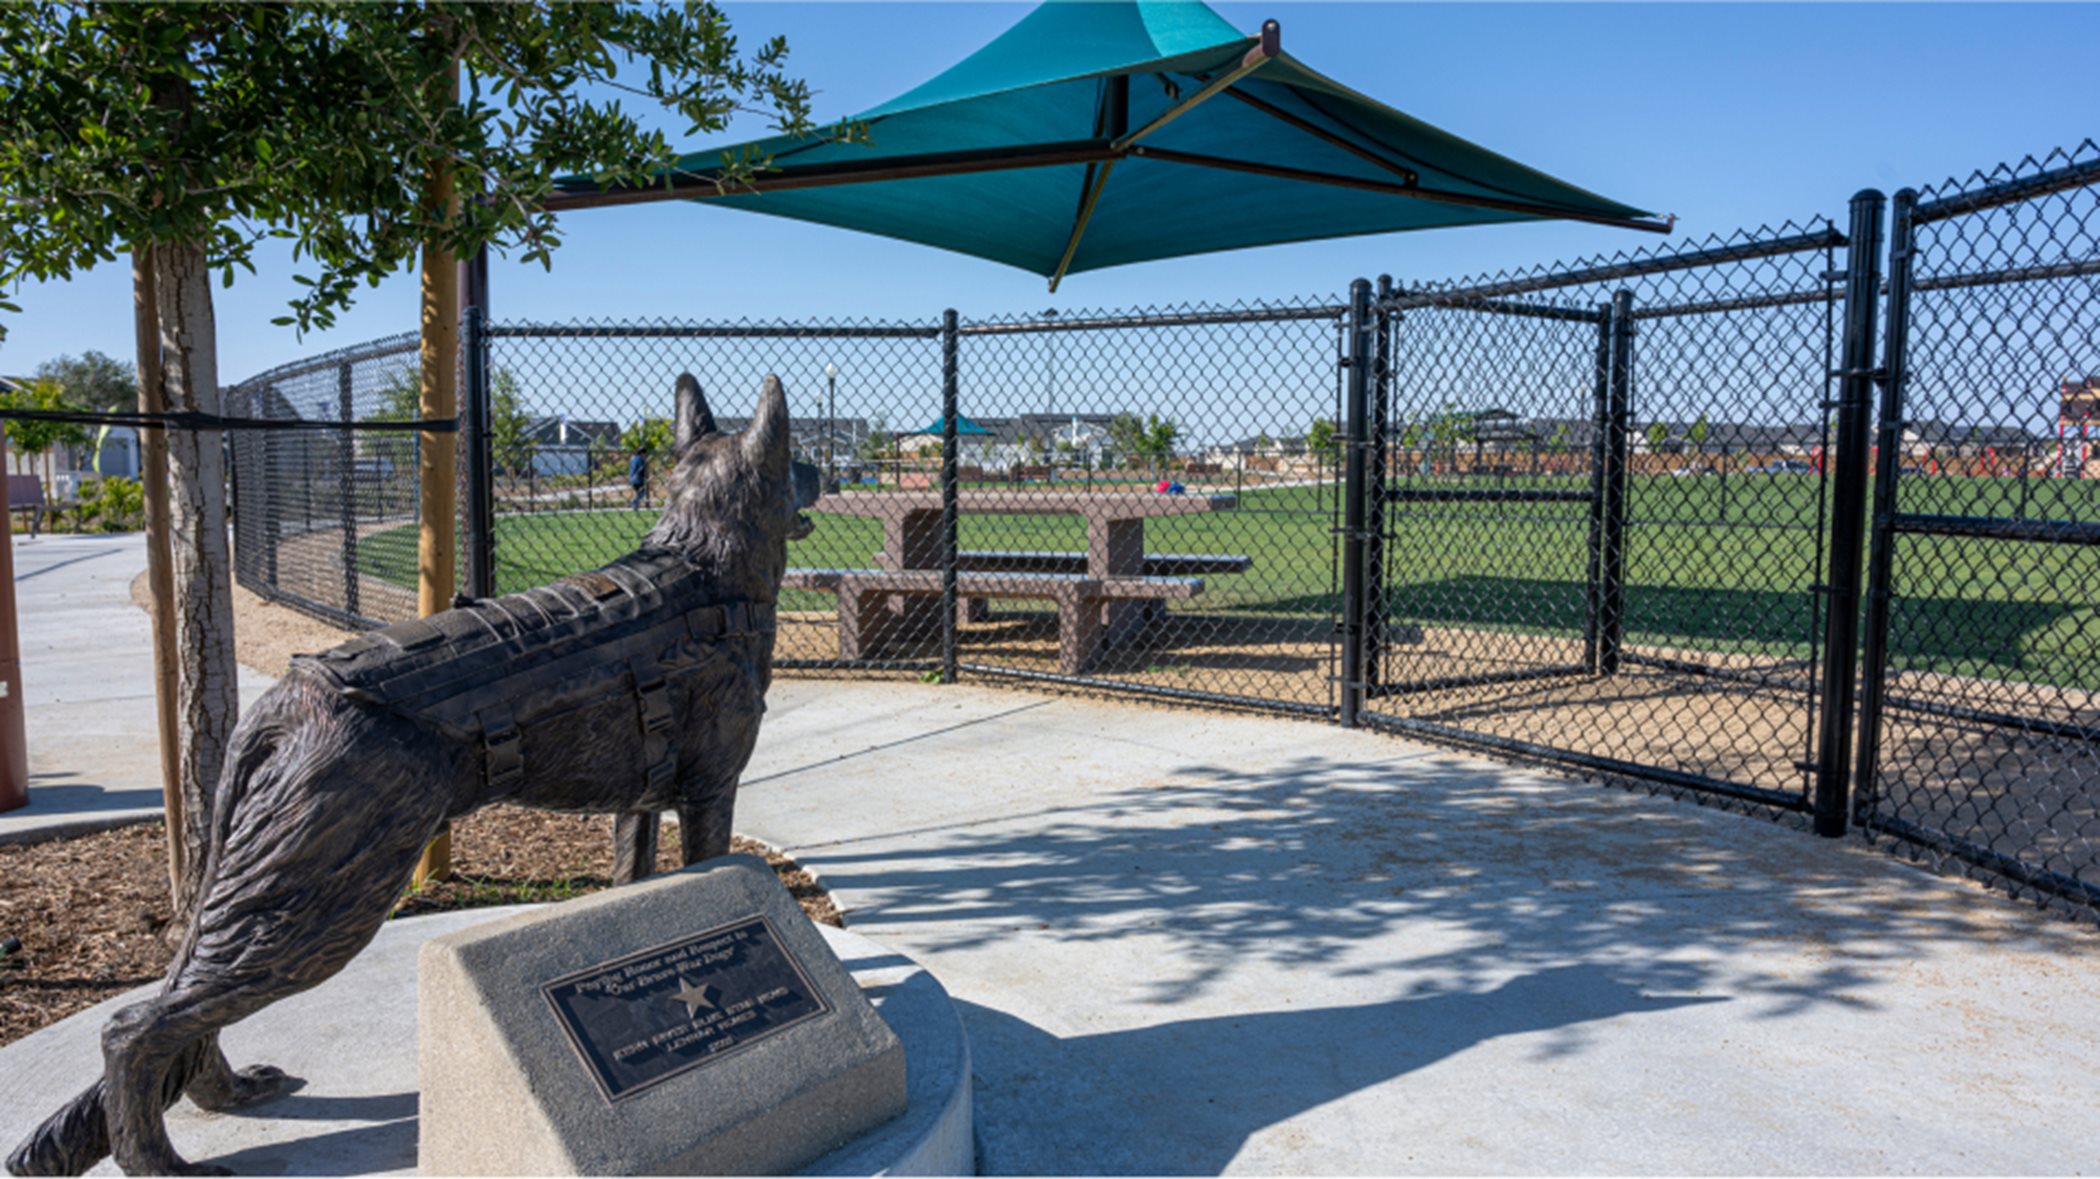 shaded dog park with statue